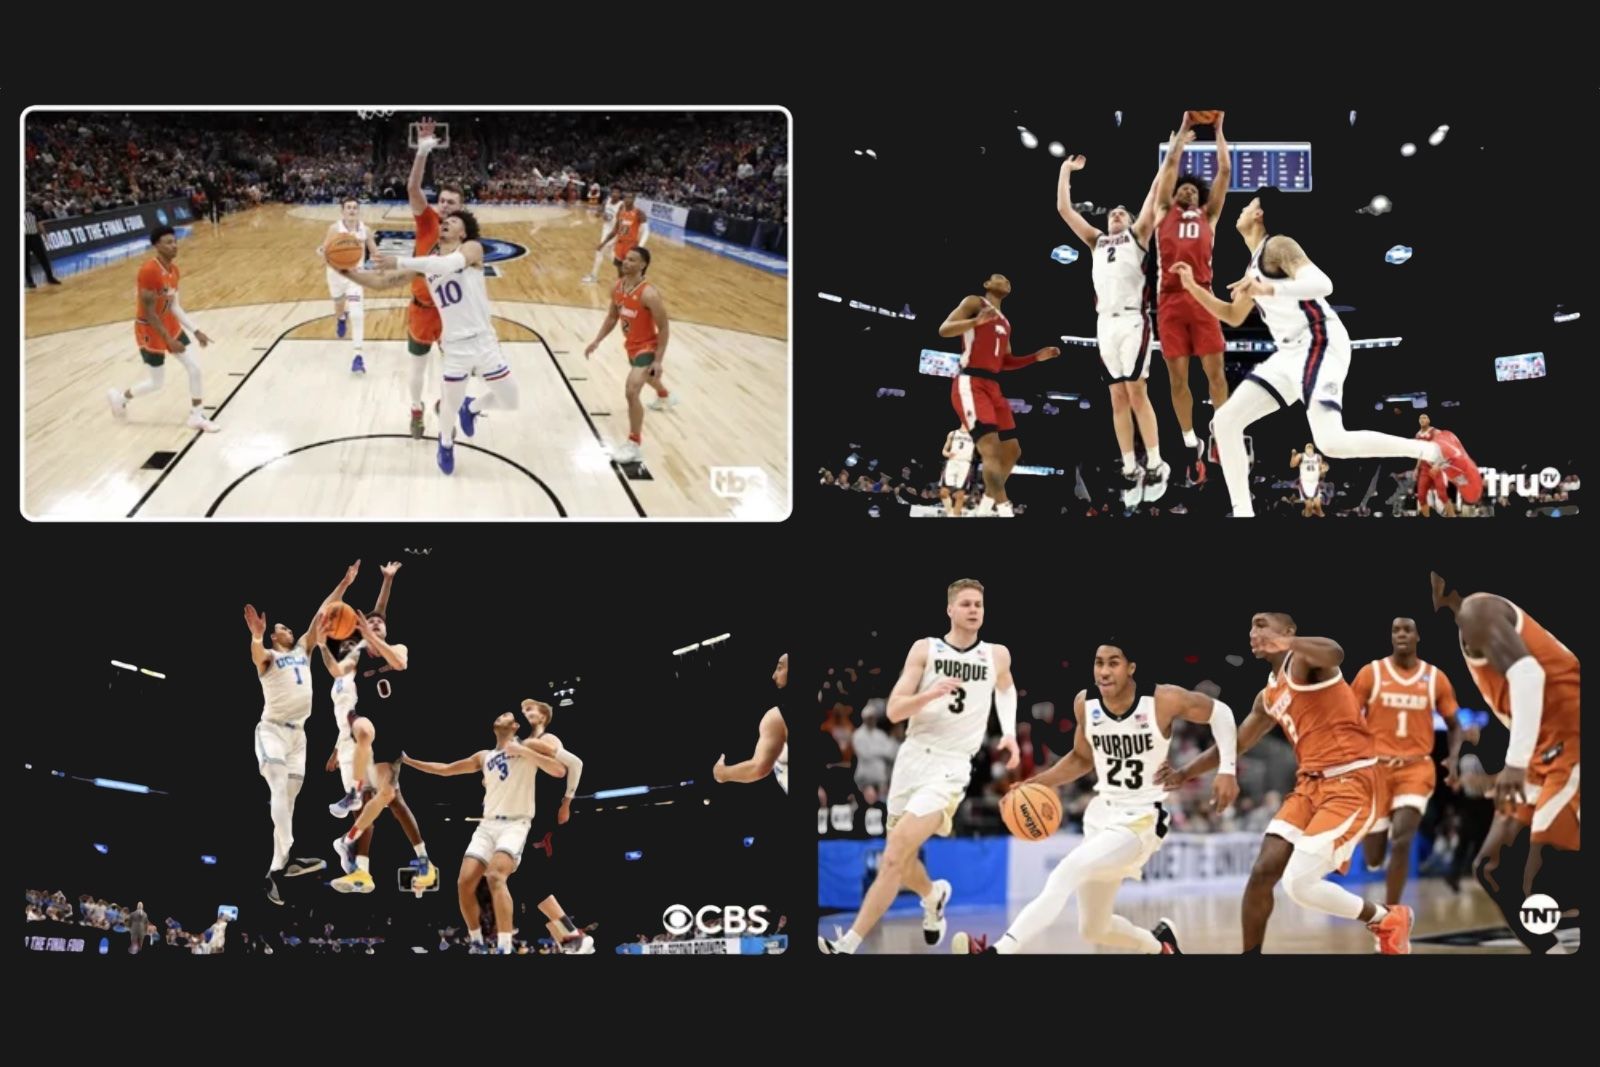 YouTube TV Multiview shows four basketball games on one screen